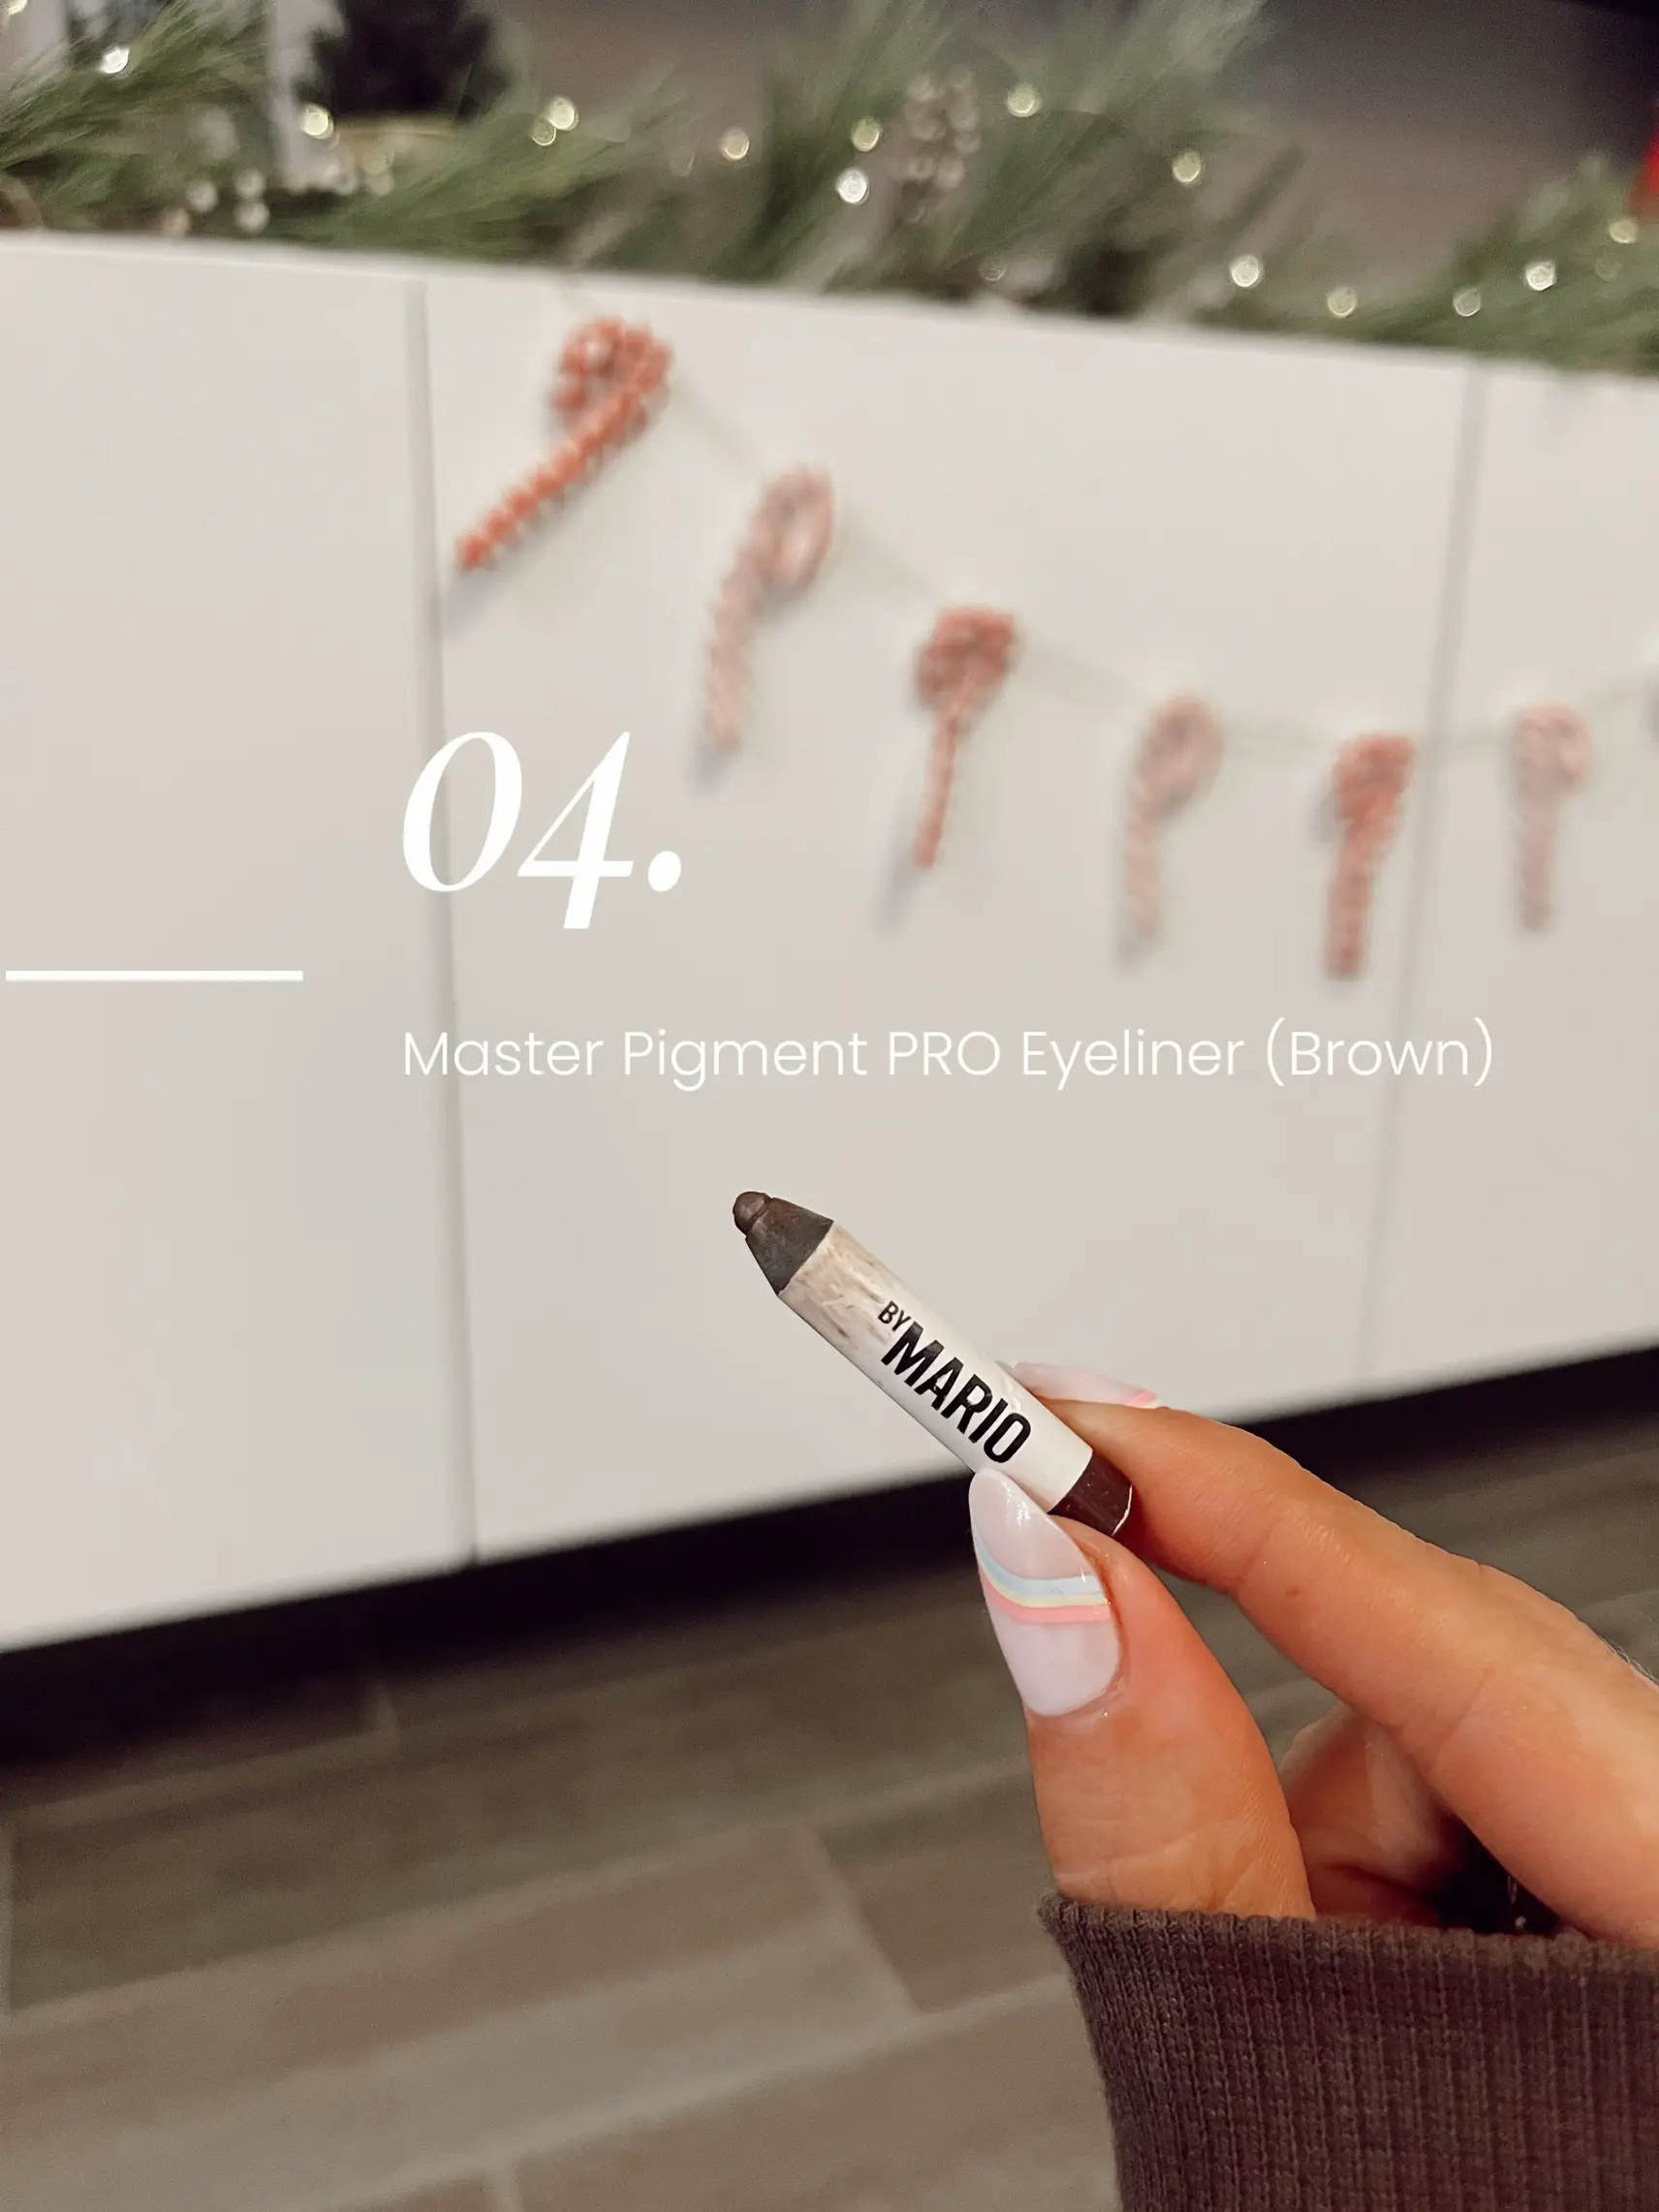  A person is holding a pencil with the words "Master Pigment PRO" on the side.